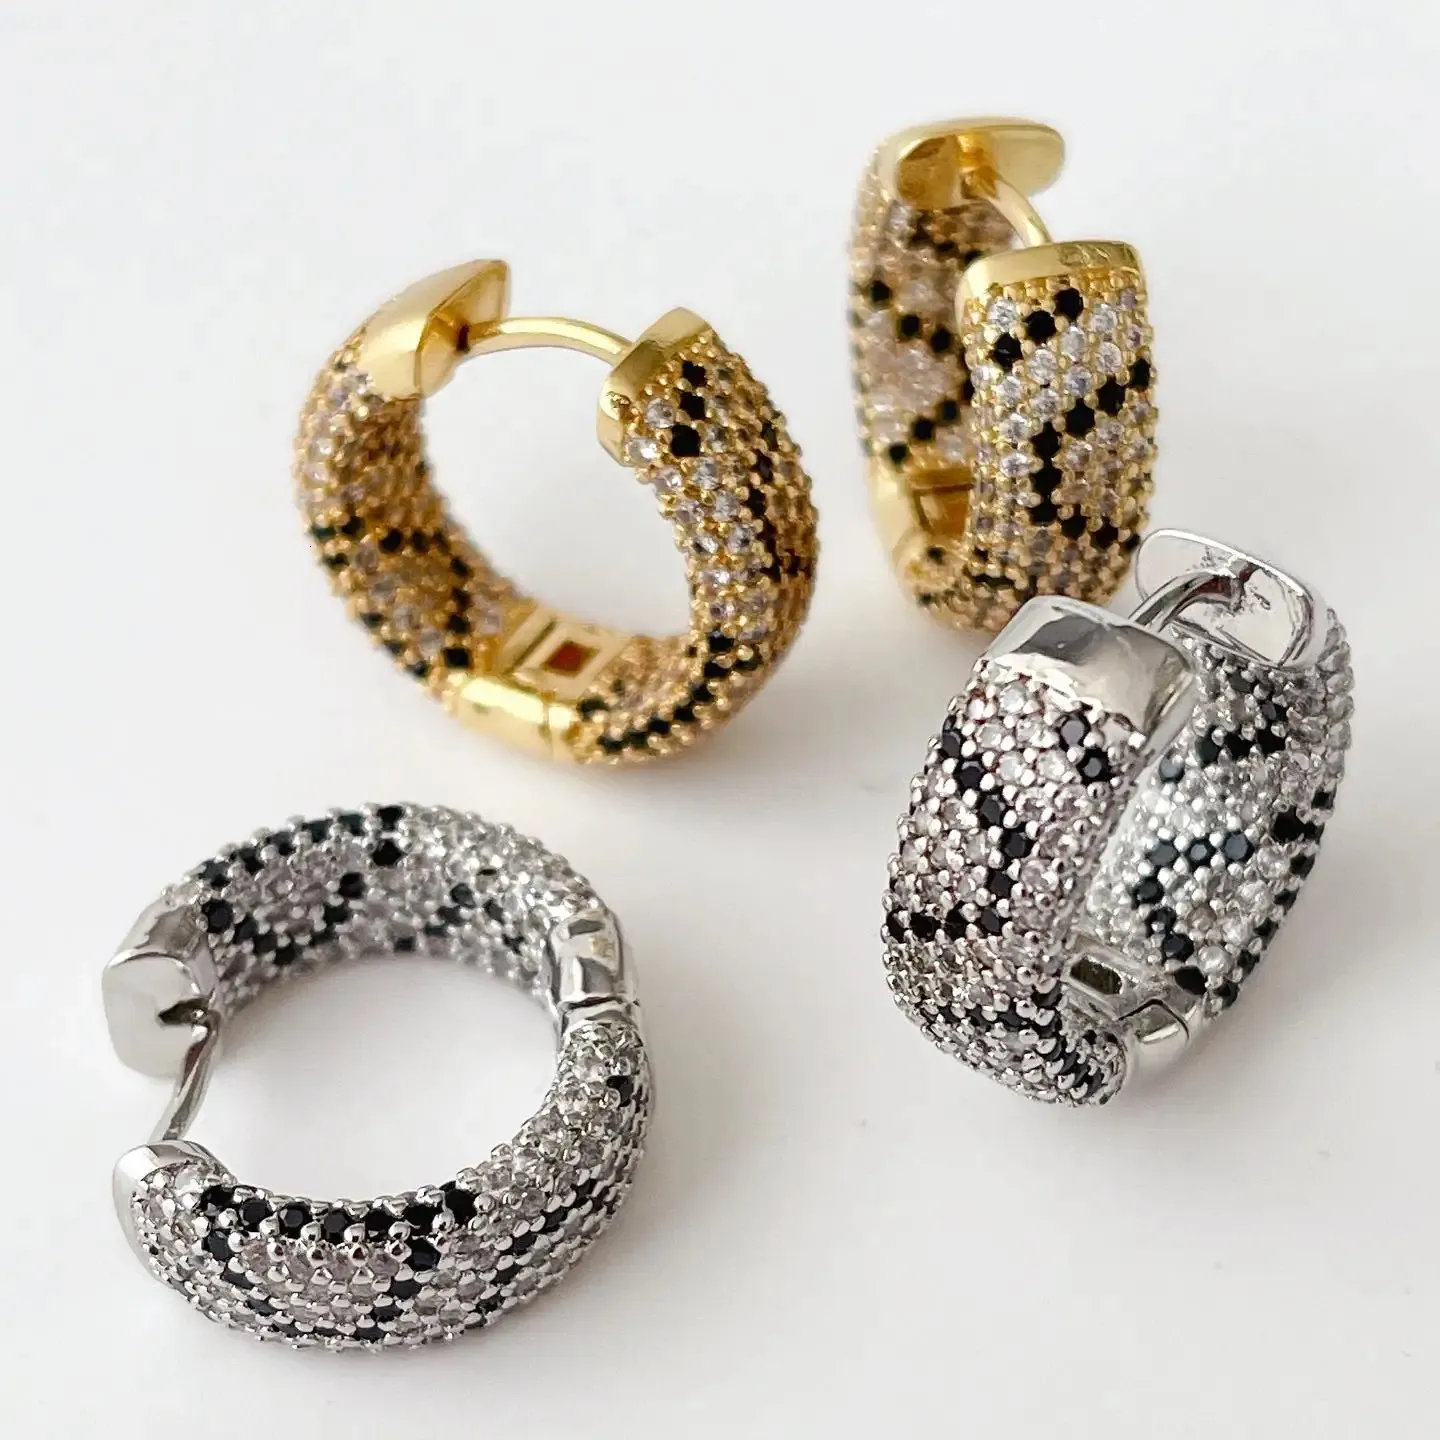 Fashionable Women European And American Retro Style Delicate High Quality Hoop  Earrings Wholesale - China Wholesale Fashion Jewelry $0.3 from Yiwu Lume  Industry Co.,Ltd | Globalsources.com